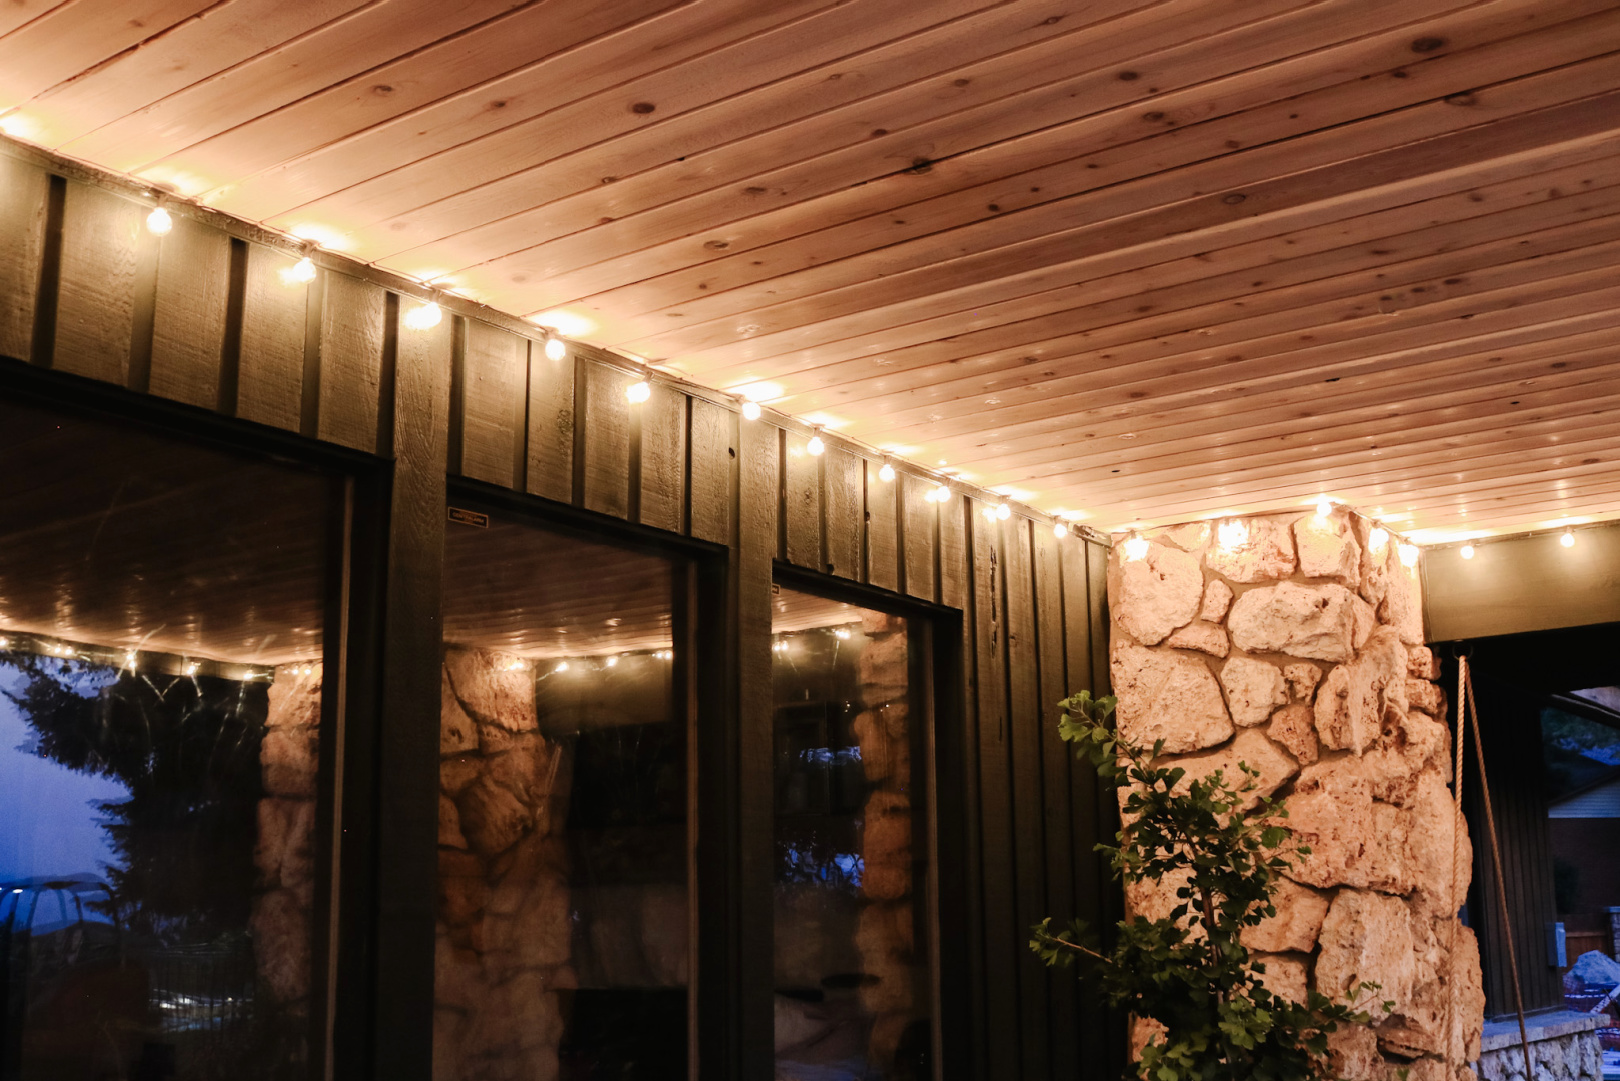 5 Ways to Enjoy Outdoor Space Longer How to hang string lights Outdoor heater